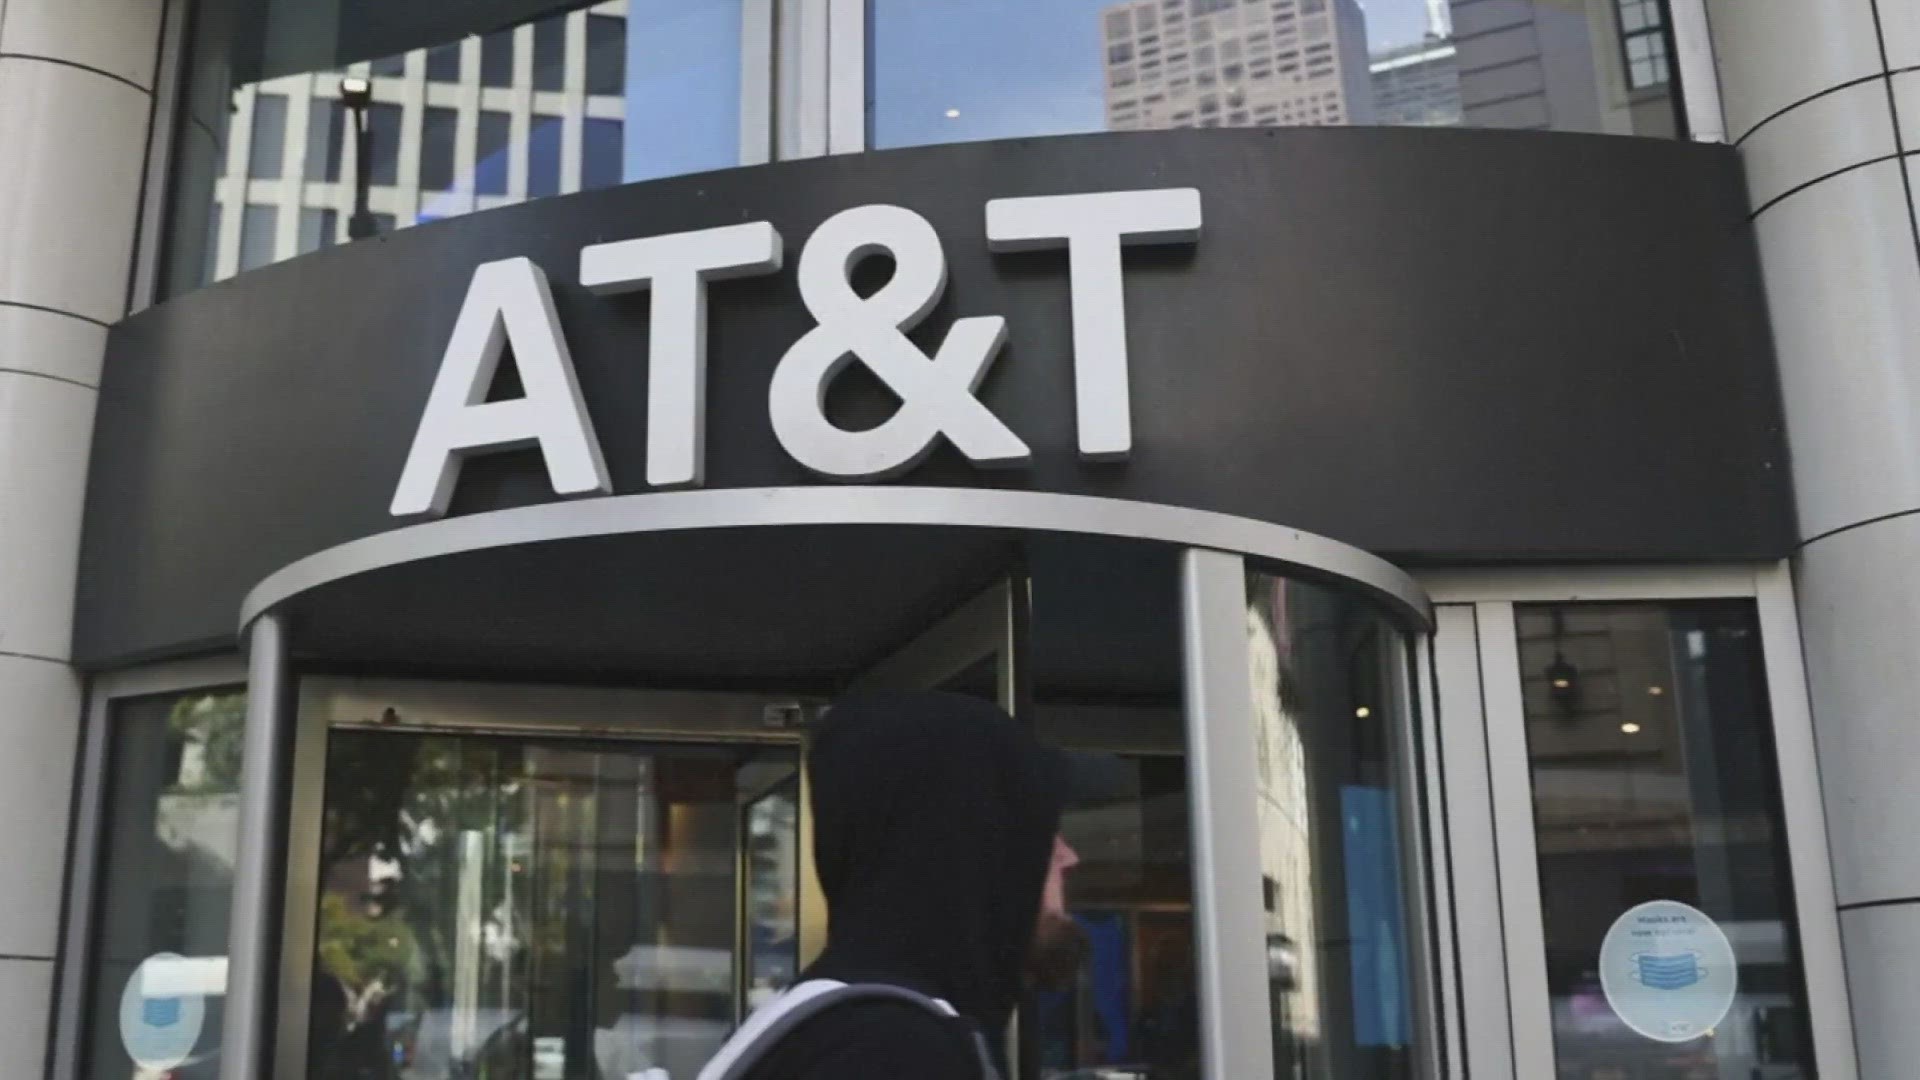 Know How AT&T’s Big Glitch Left Thousands Hanging and What’s Next on the Cards?